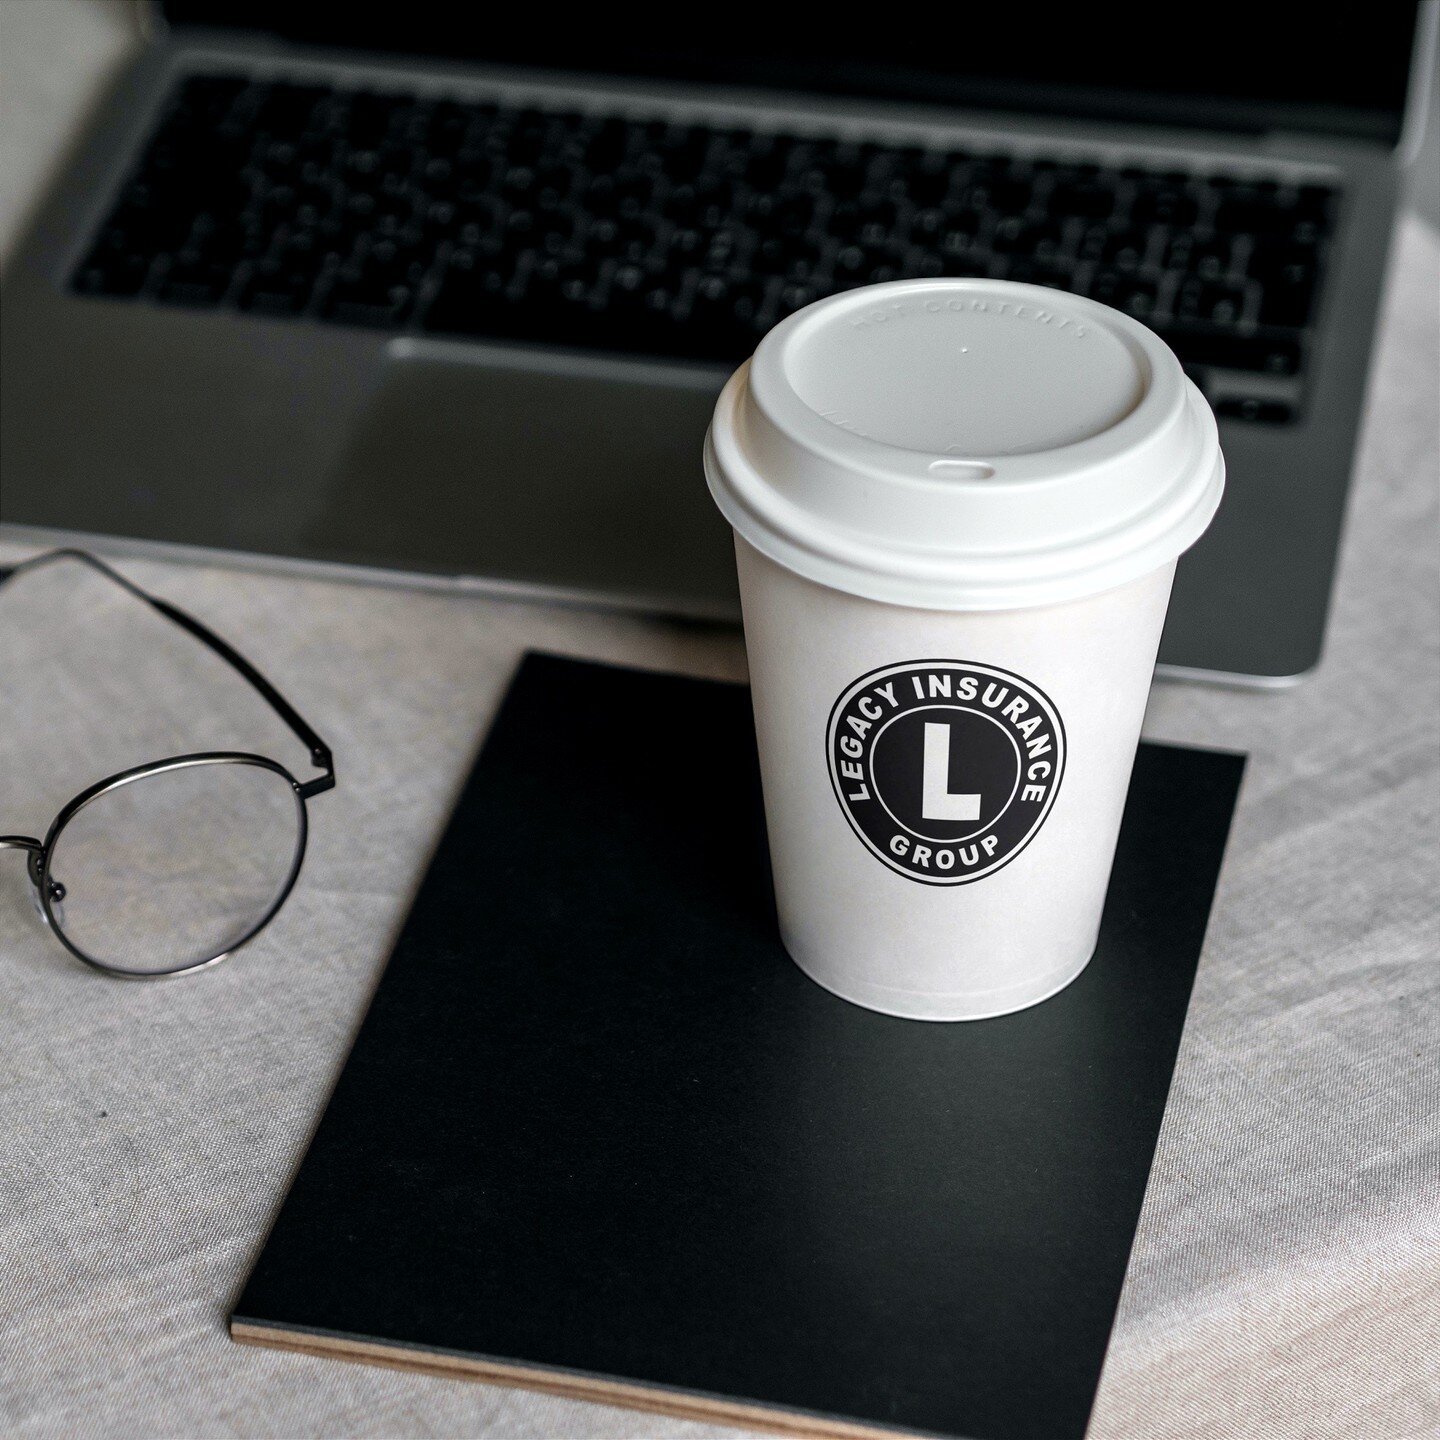 Mornings at Legacy begin with more than coffee - they begin with a sip of our shared ambition ☕️🌥️

Let the aroma of ambition fill your cup and let's brew a day of triumph together 🤩

Here's to the perfect blend of productivity and passion at Legac